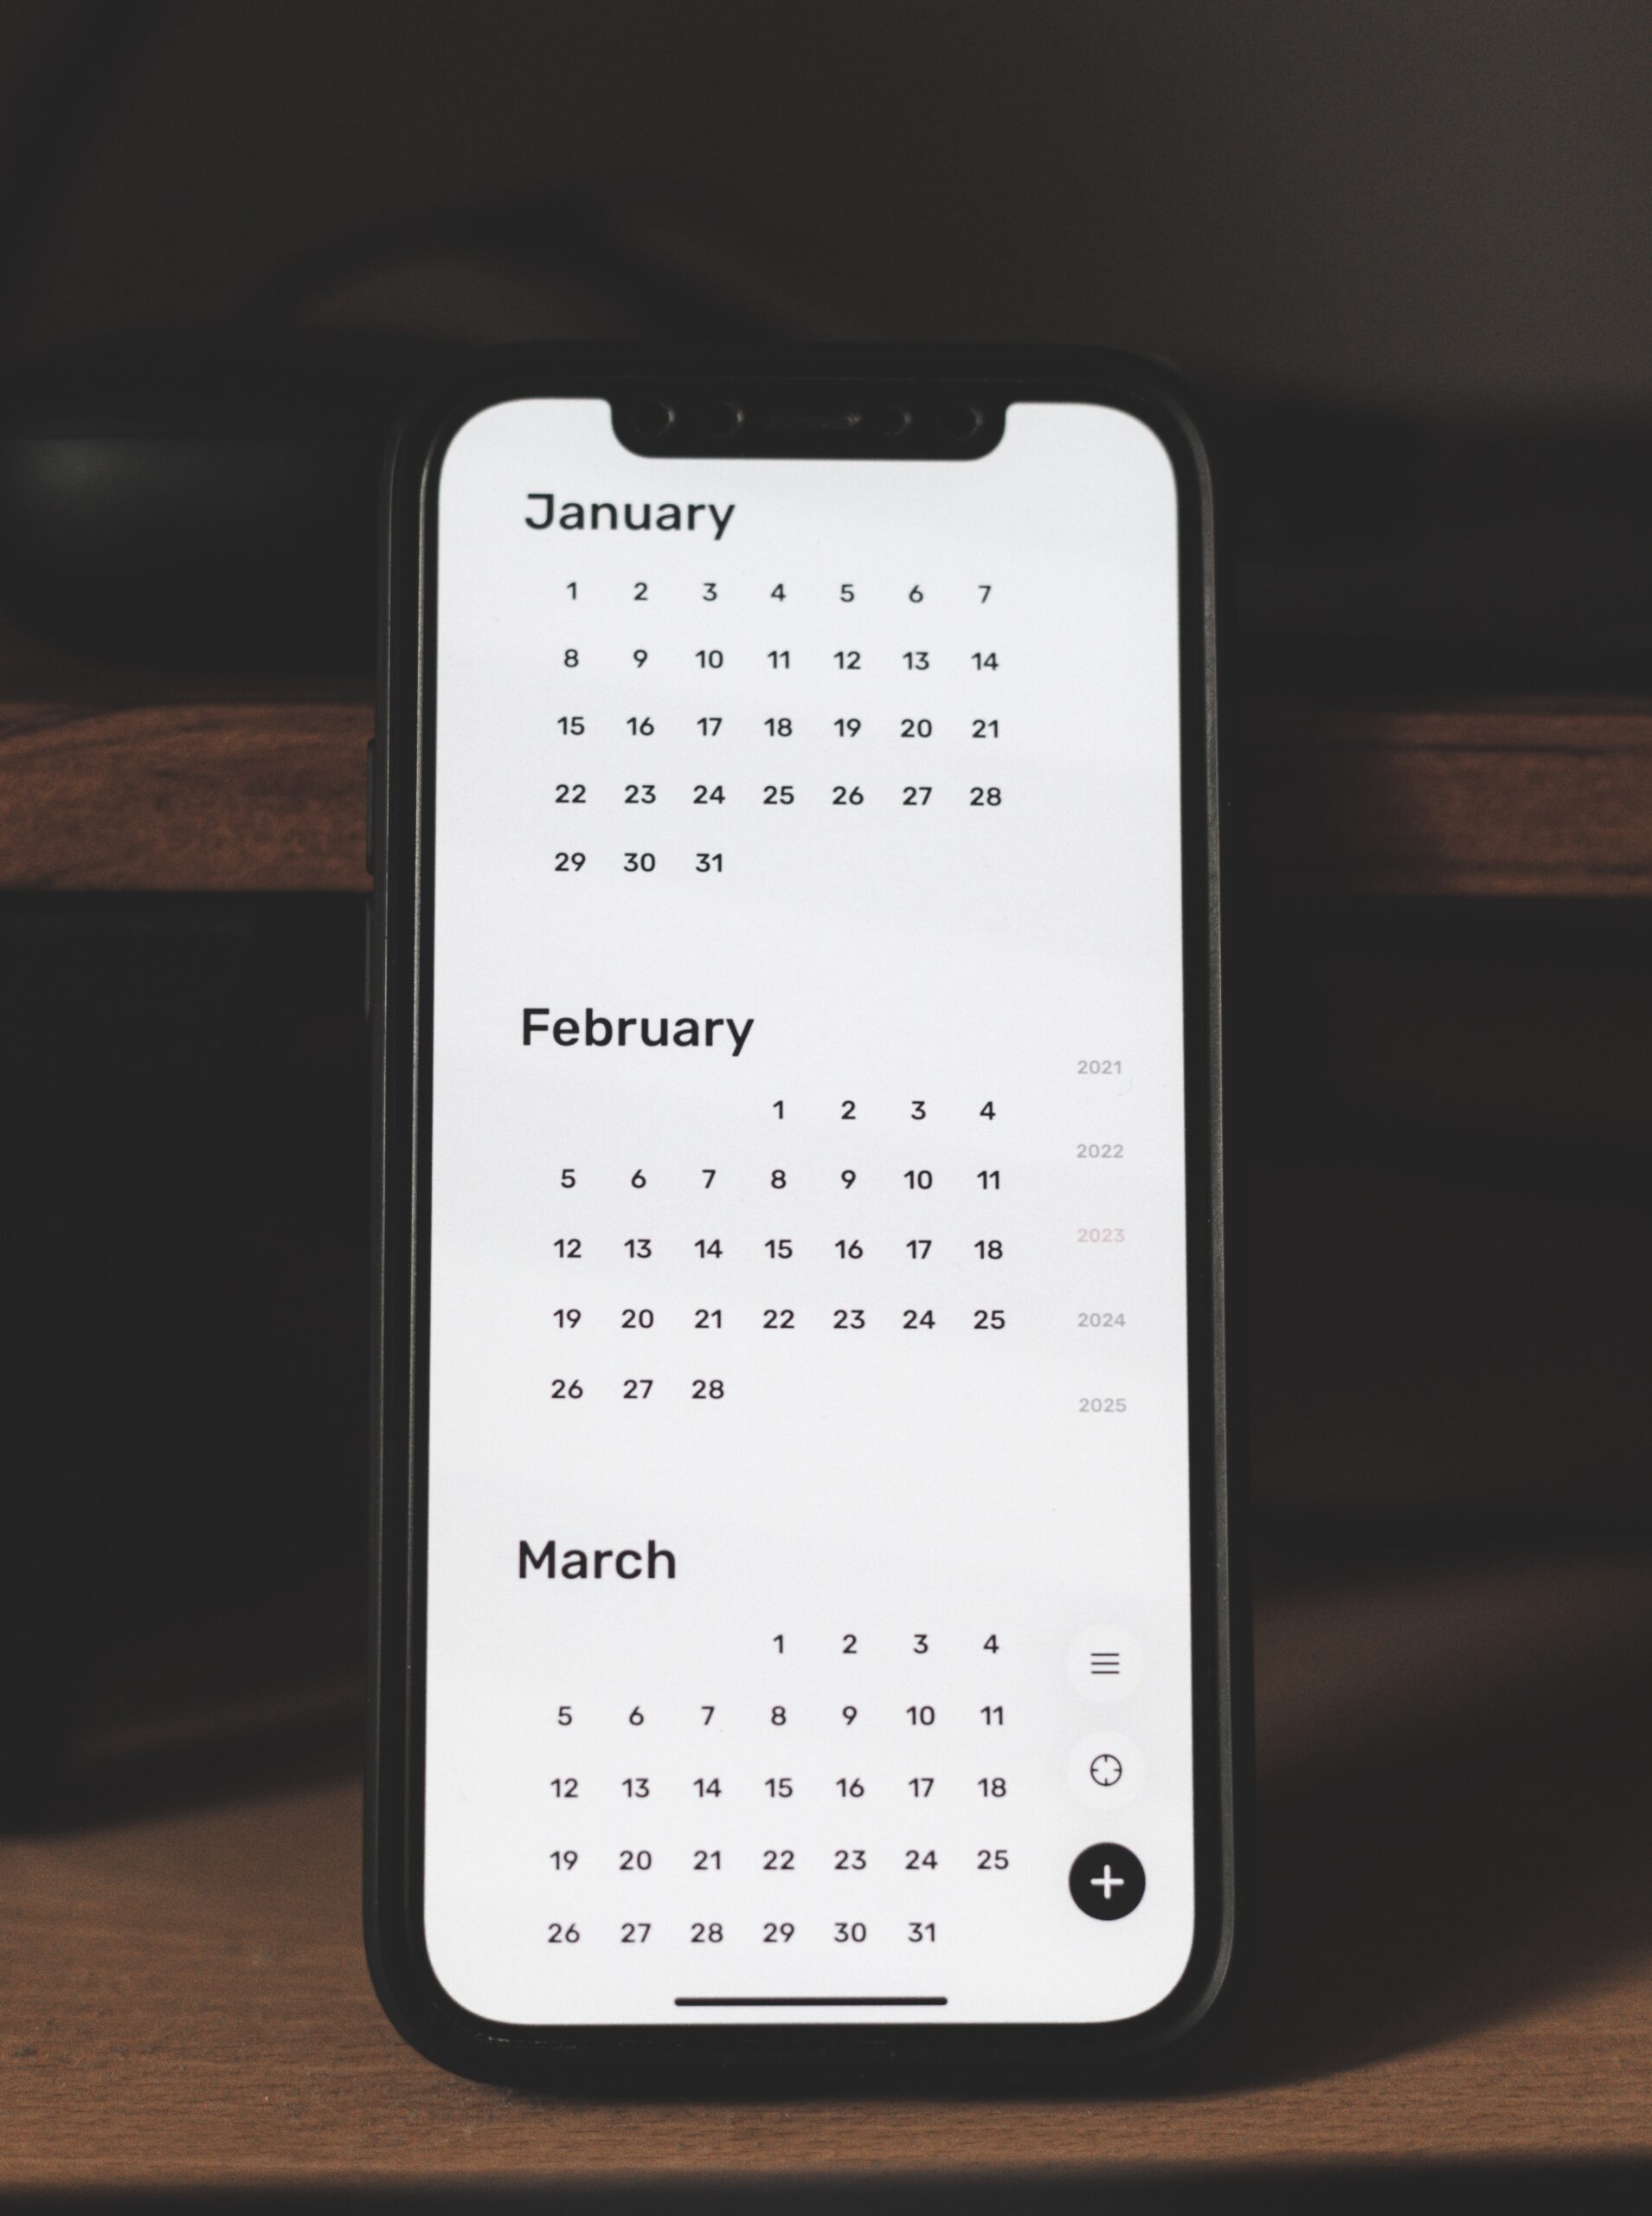 A calendar shows three months on the display of a phone.